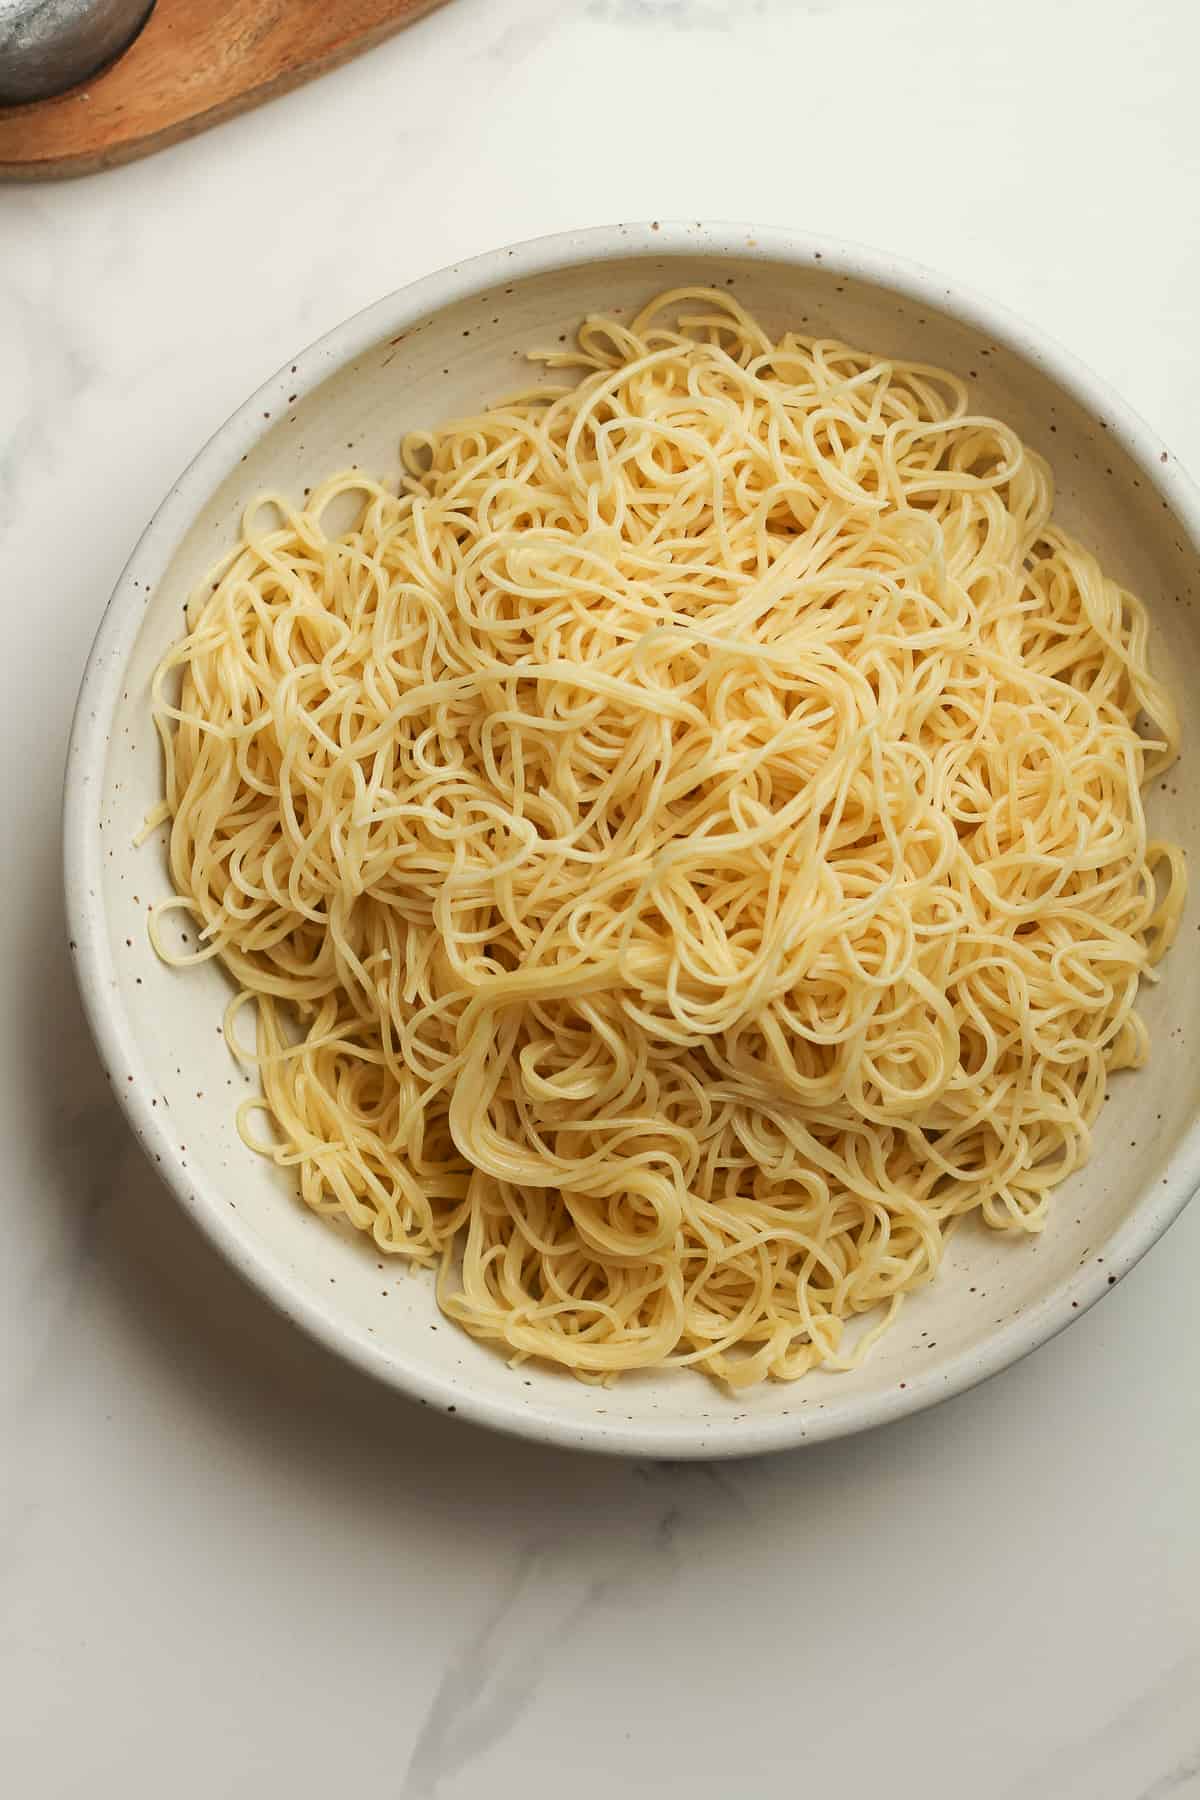 A bowl of angel hair pasta.